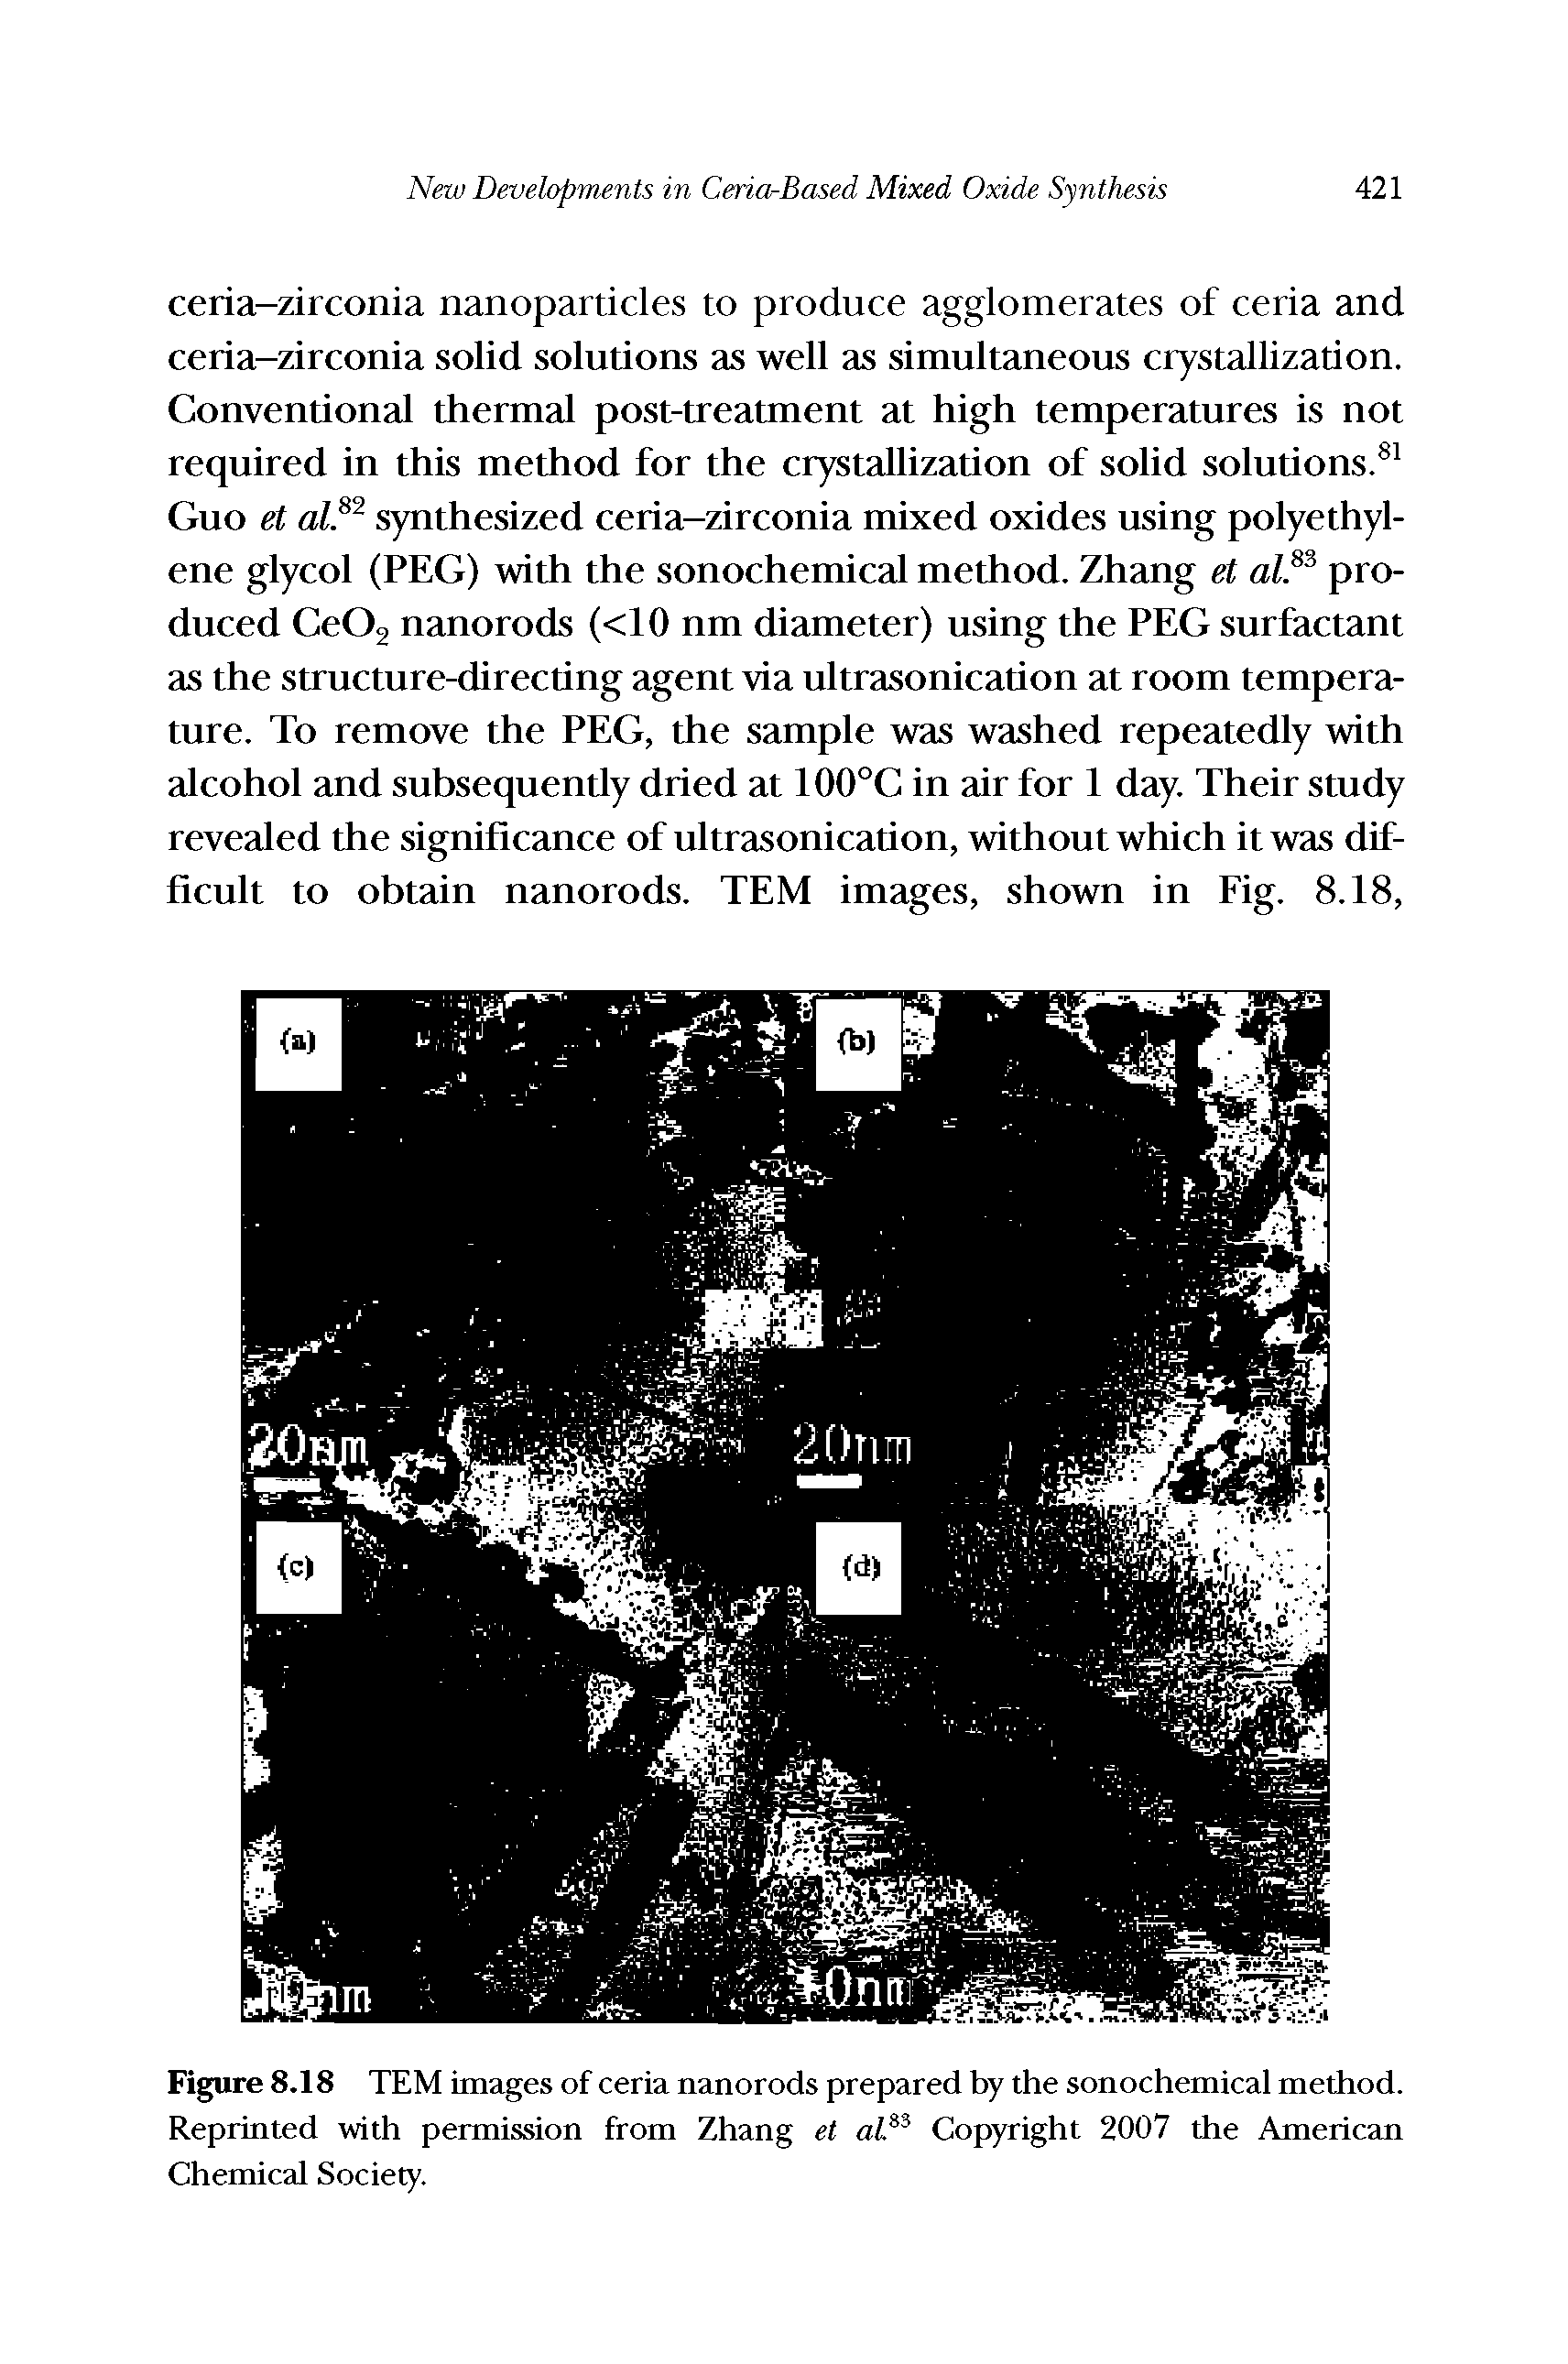 Figure 8.18 TEM images of ceria nanorods prepared by the sonochemical method. Reprinted with permission from Zhang et Copyright 2007 the American Chemical Society.